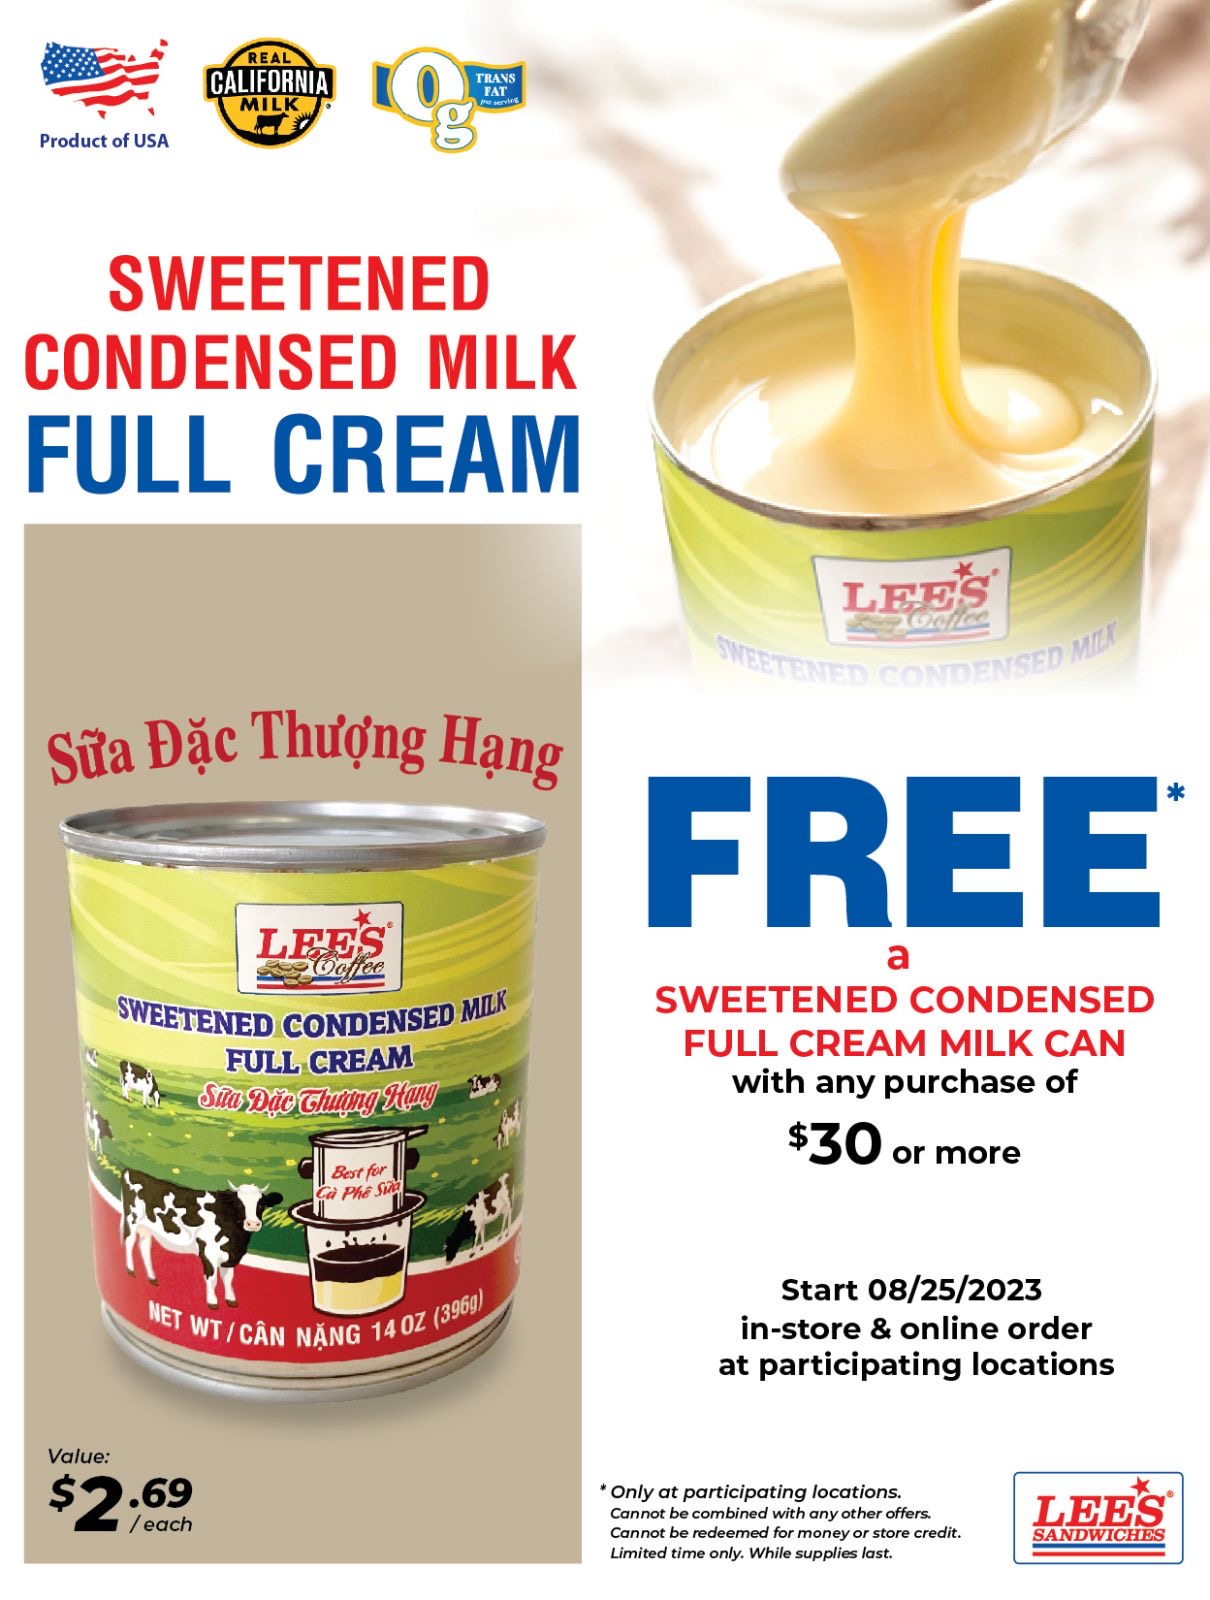 FREE 1 Condensed milk for any order of $30 or more from 08/25/23 only at participating locations